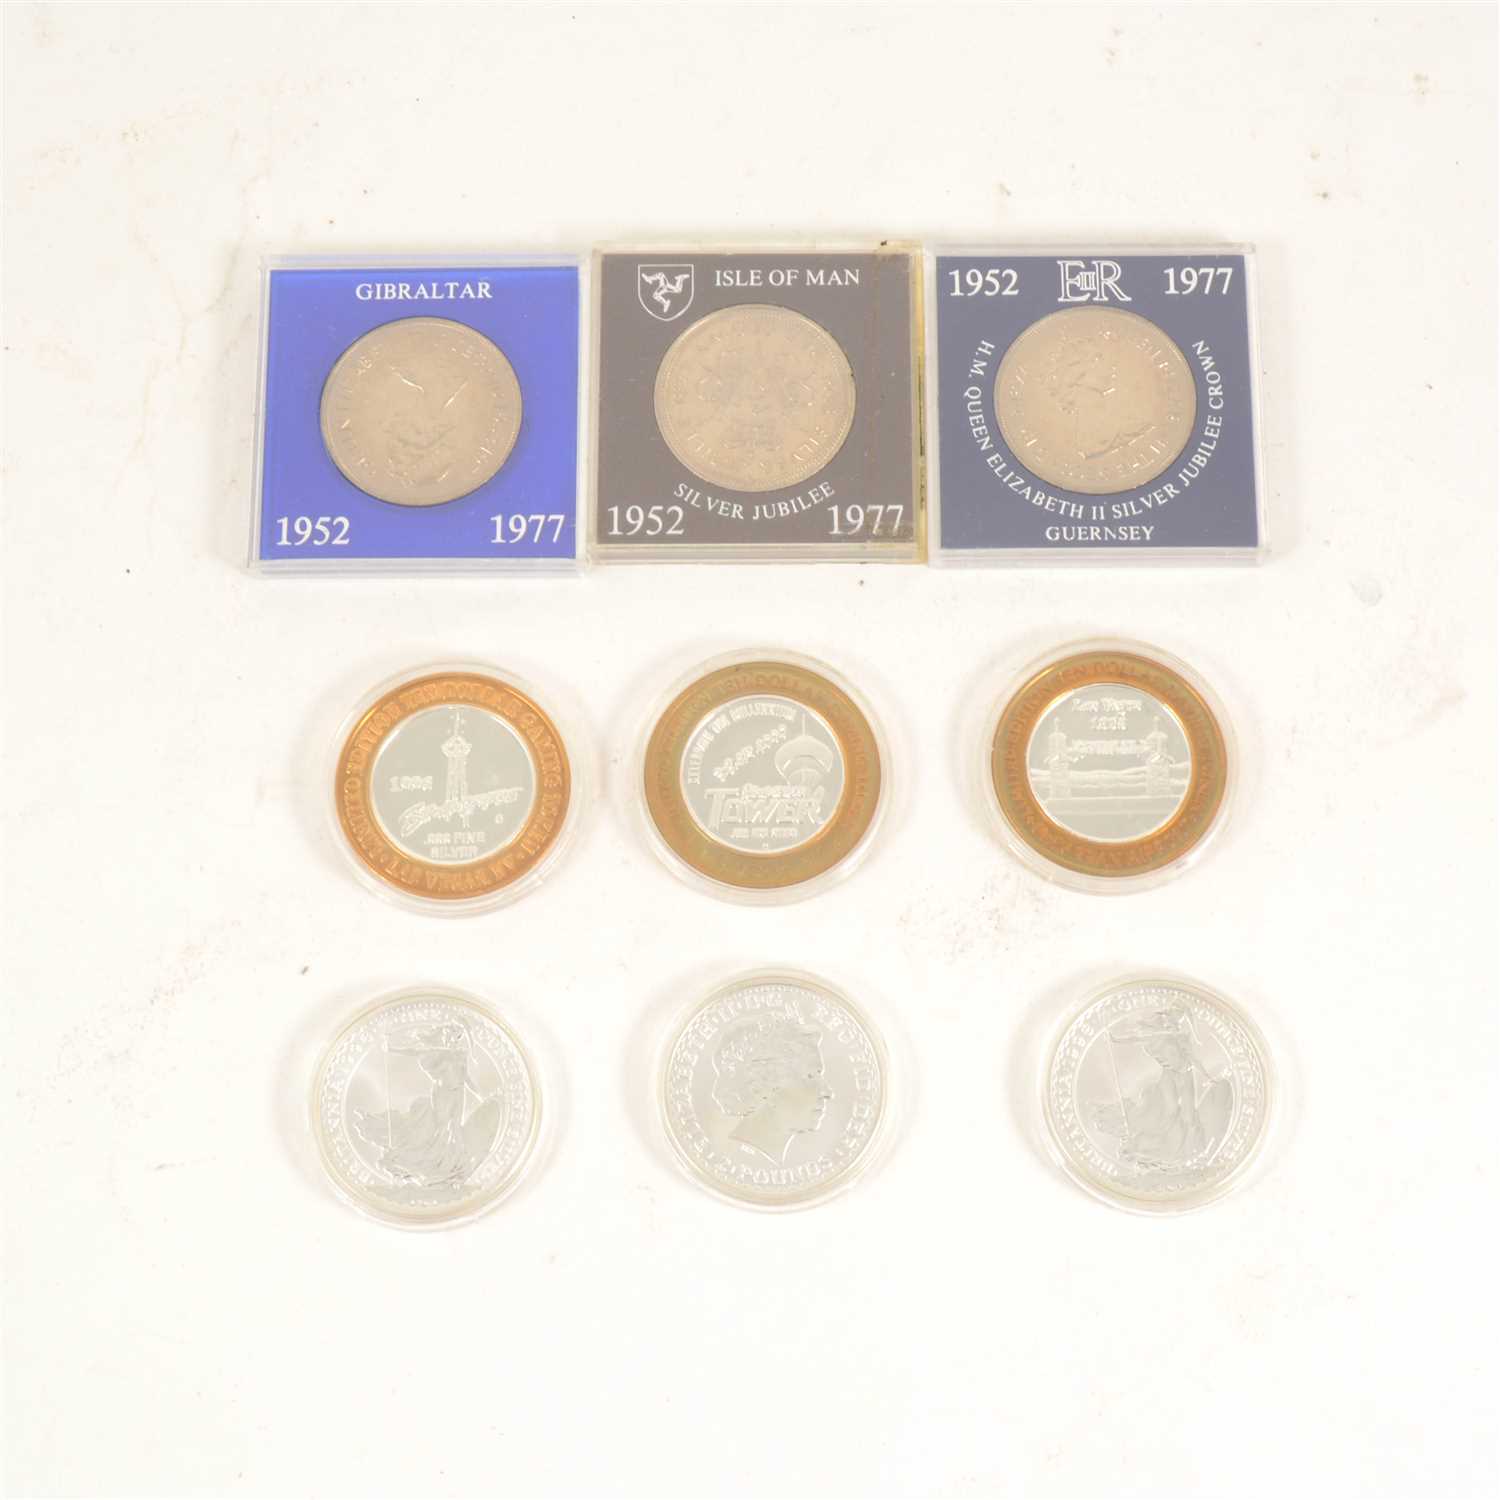 Lot 130 - A collection of modern silver and nickel coins, British paper money, fine silver "Limited Edition Ten Dollar Gaming Tokens" Britannia silver two pound coins weighing 1oz each